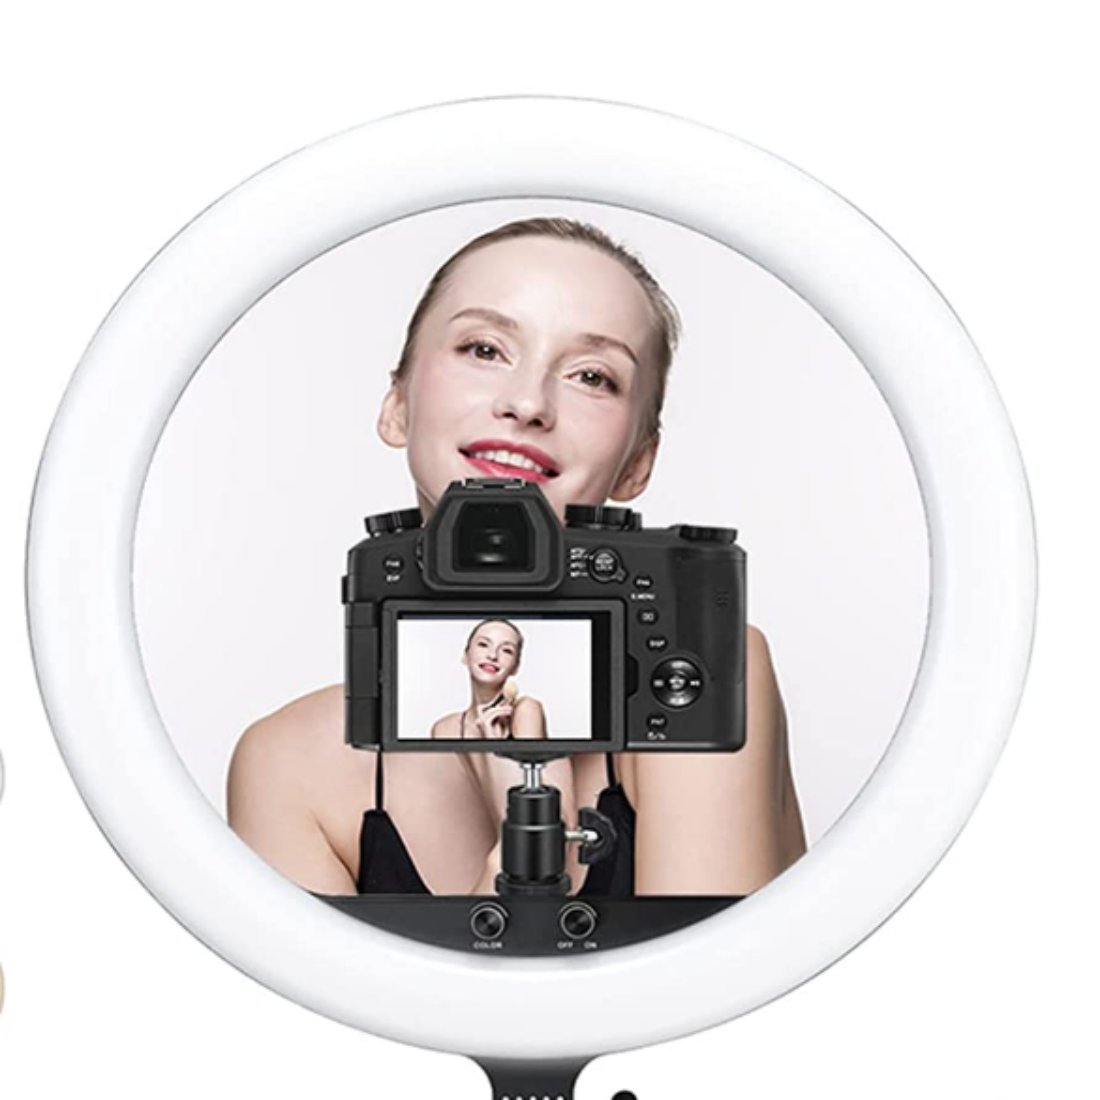 An image showing the Godox LR150 18-inch LED Ring Light with a mounted camera recording a woman